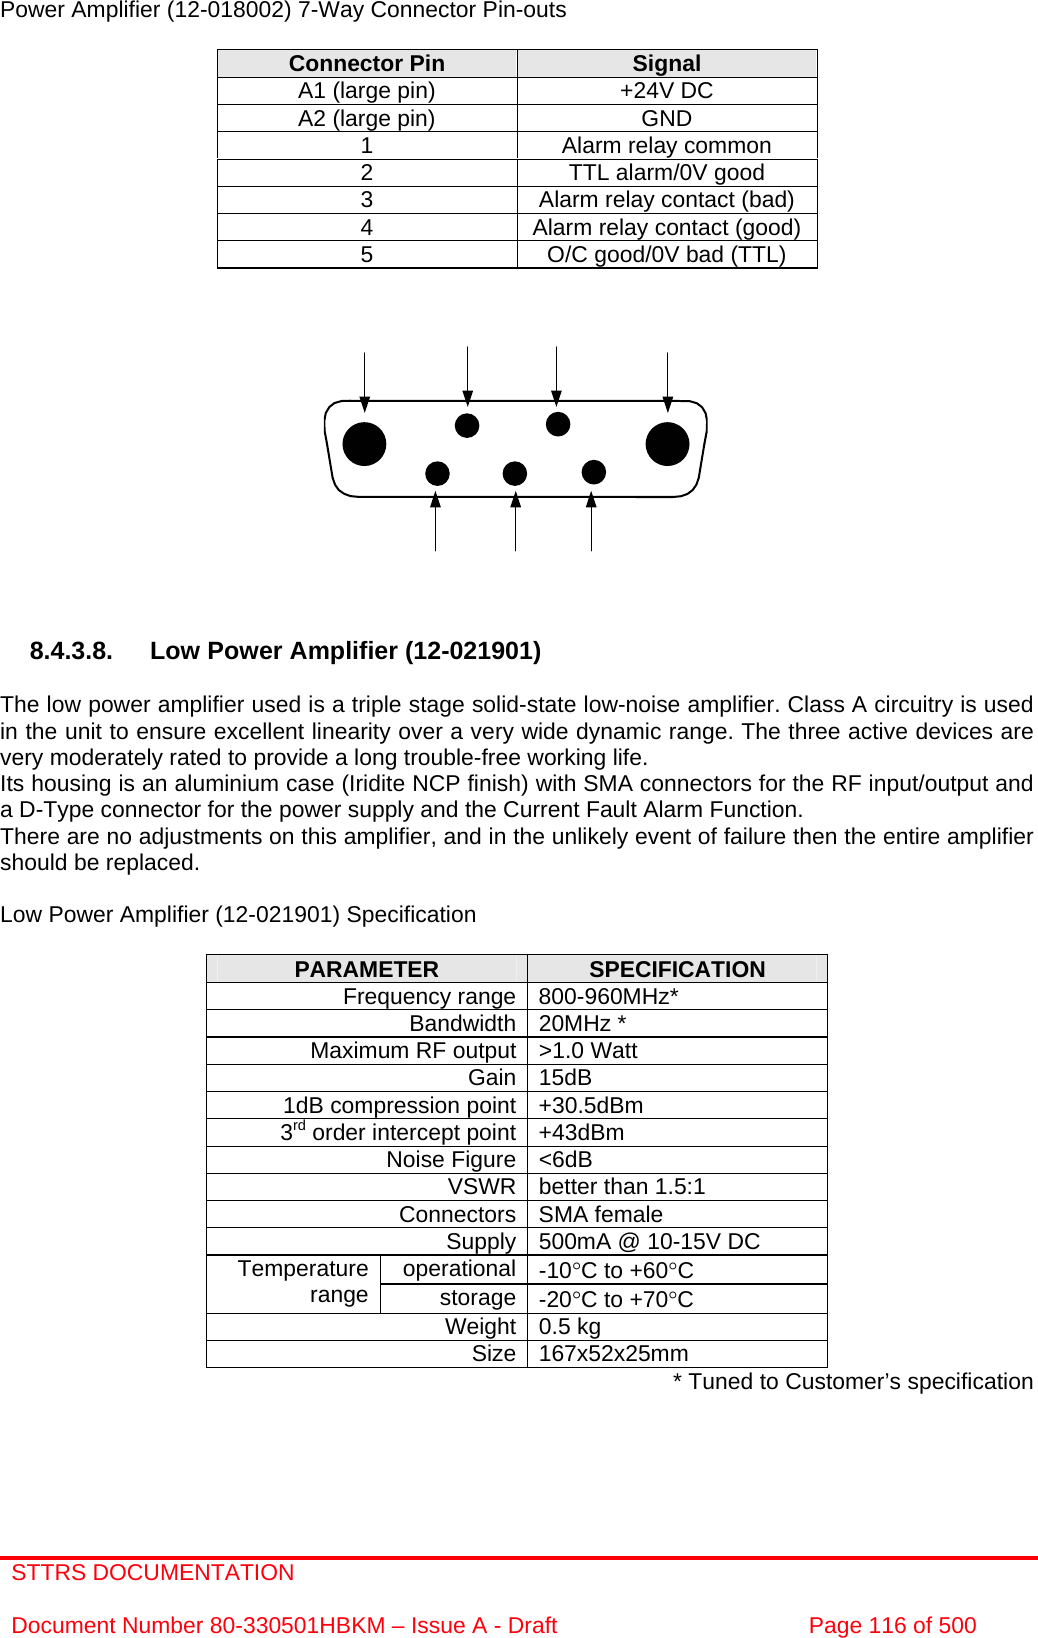 STTRS DOCUMENTATION  Document Number 80-330501HBKM – Issue A - Draft  Page 116 of 500   Power Amplifier (12-018002) 7-Way Connector Pin-outs  Connector Pin  Signal A1 (large pin)  +24V DC A2 (large pin)  GND 1  Alarm relay common 2  TTL alarm/0V good 3  Alarm relay contact (bad) 4  Alarm relay contact (good) 5  O/C good/0V bad (TTL)               8.4.3.8.  Low Power Amplifier (12-021901)  The low power amplifier used is a triple stage solid-state low-noise amplifier. Class A circuitry is used in the unit to ensure excellent linearity over a very wide dynamic range. The three active devices are very moderately rated to provide a long trouble-free working life.  Its housing is an aluminium case (Iridite NCP finish) with SMA connectors for the RF input/output and a D-Type connector for the power supply and the Current Fault Alarm Function. There are no adjustments on this amplifier, and in the unlikely event of failure then the entire amplifier should be replaced.  Low Power Amplifier (12-021901) Specification  PARAMETER  SPECIFICATION Frequency range 800-960MHz* Bandwidth 20MHz * Maximum RF output &gt;1.0 Watt Gain 15dB 1dB compression point +30.5dBm 3rd order intercept point +43dBm Noise Figure &lt;6dB VSWR better than 1.5:1 Connectors SMA female Supply 500mA @ 10-15V DC operational -10°C to +60°C Temperature range  storage -20°C to +70°C Weight 0.5 kg Size 167x52x25mm * Tuned to Customer’s specification 